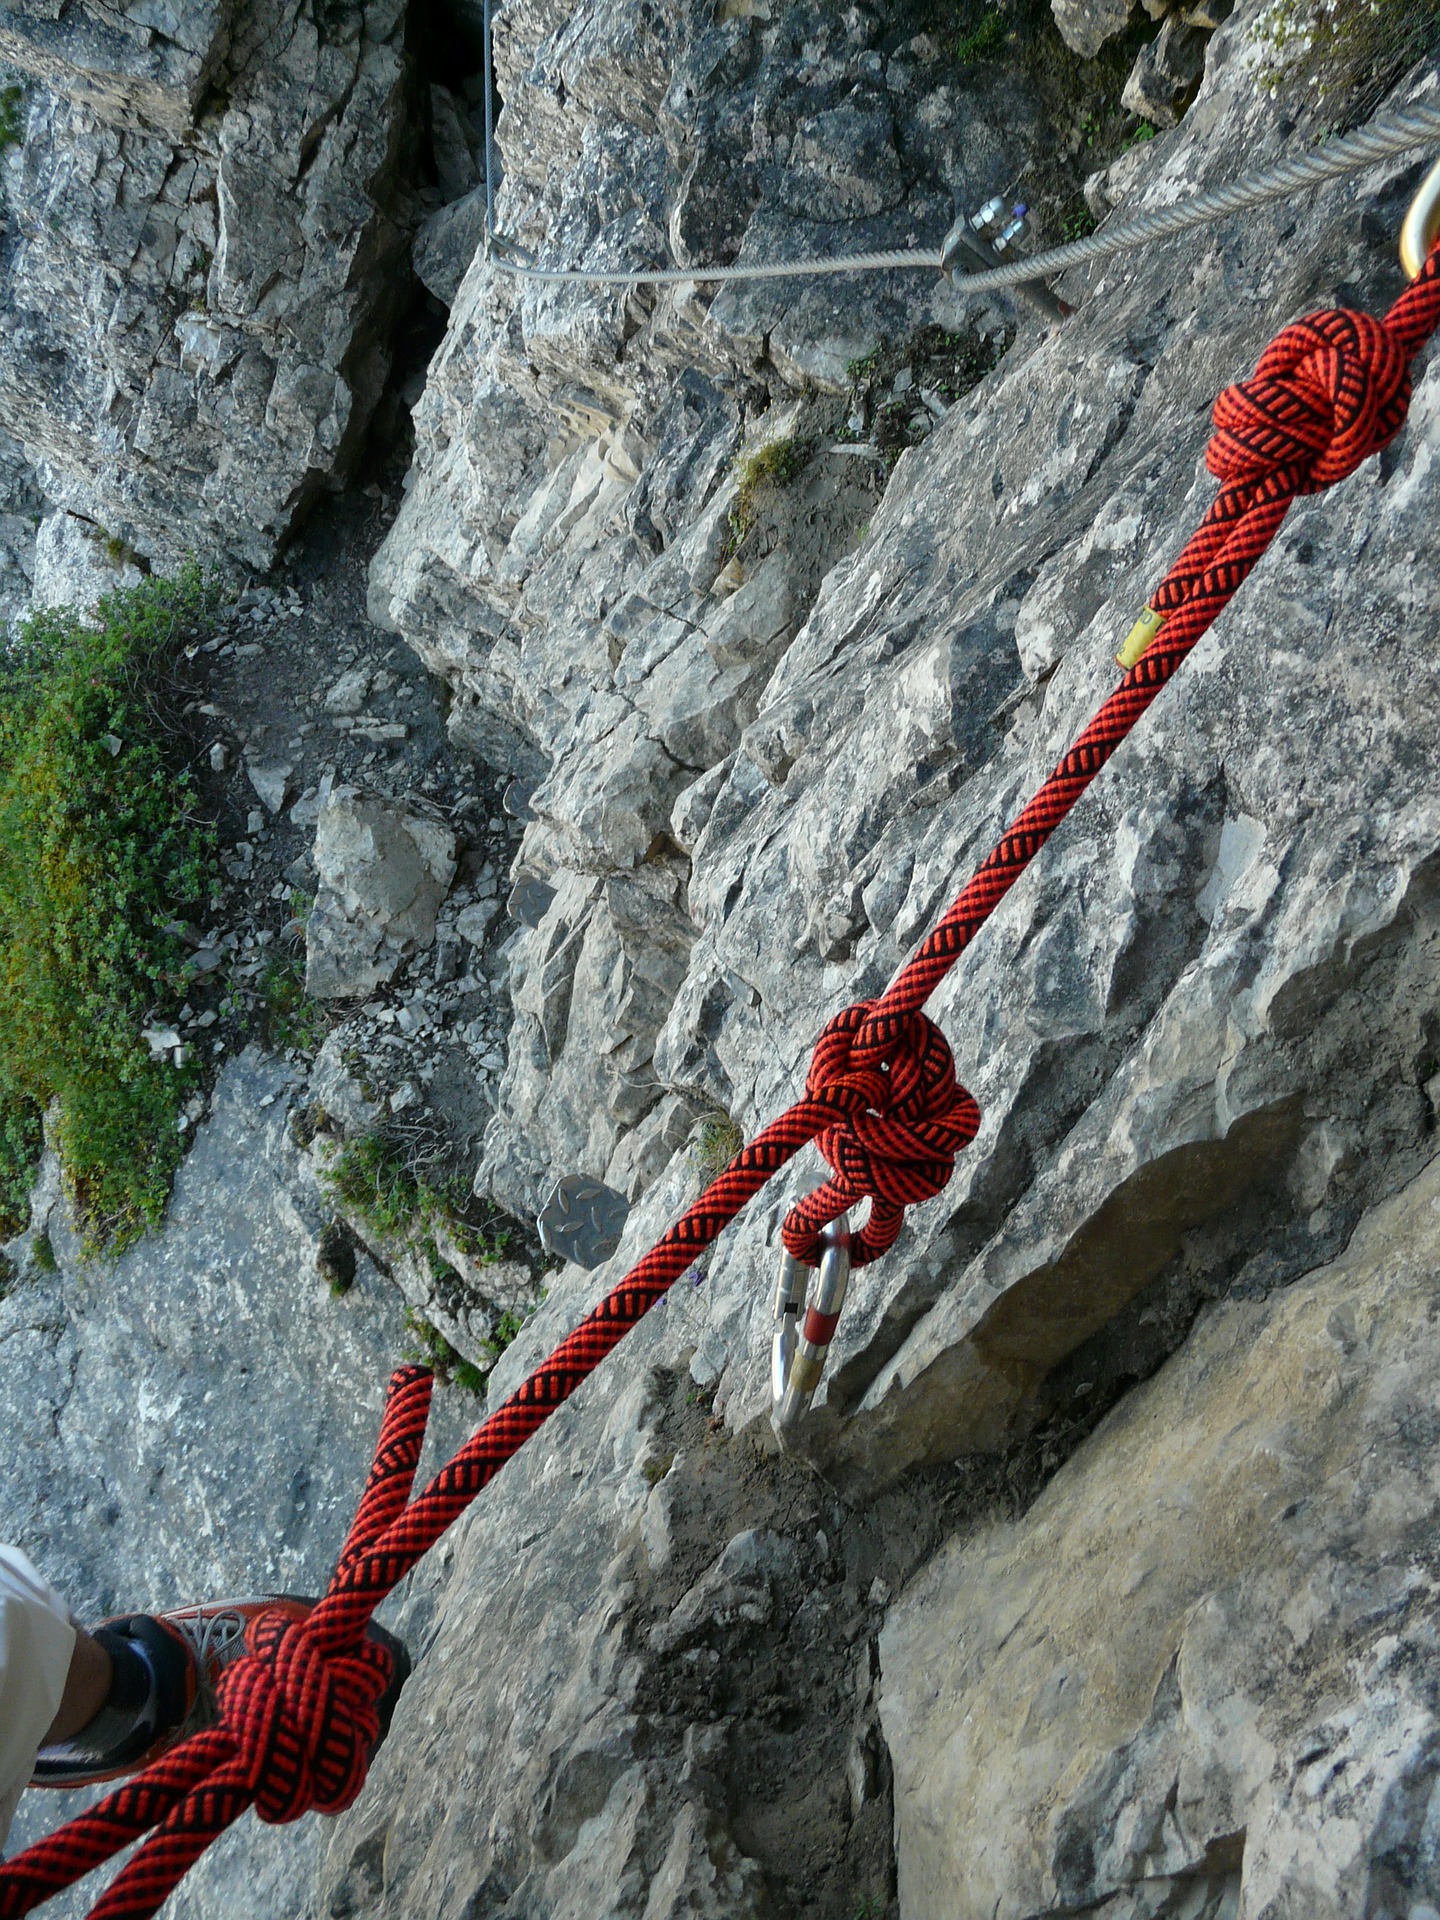 Climbing relies on very strong knots with tough ropes